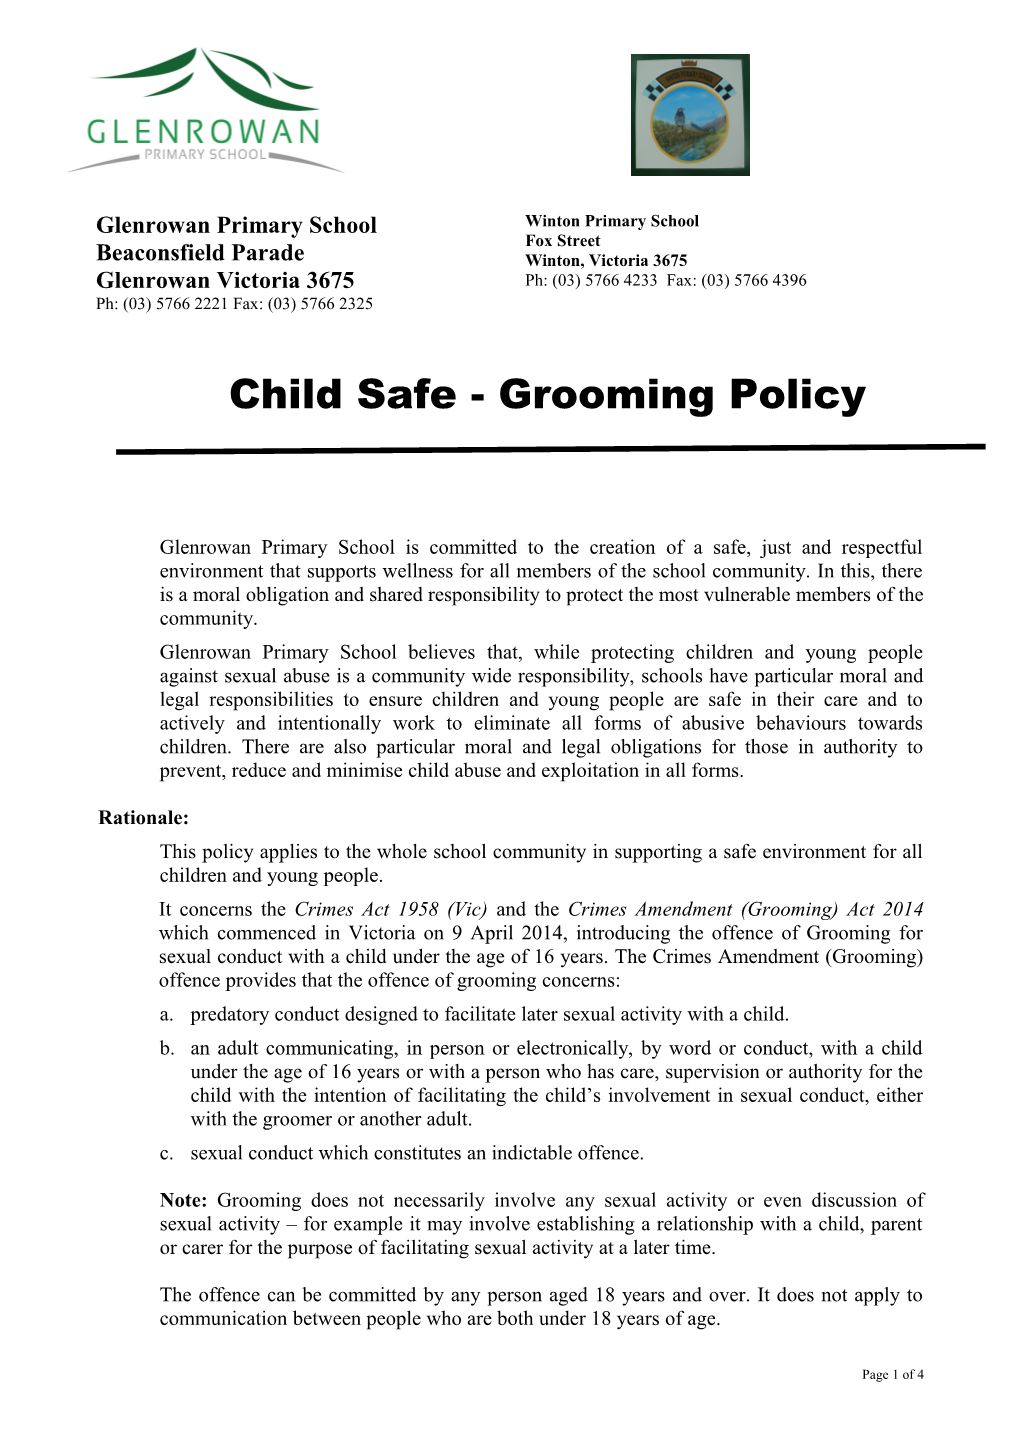 Child Safe - Grooming Policy